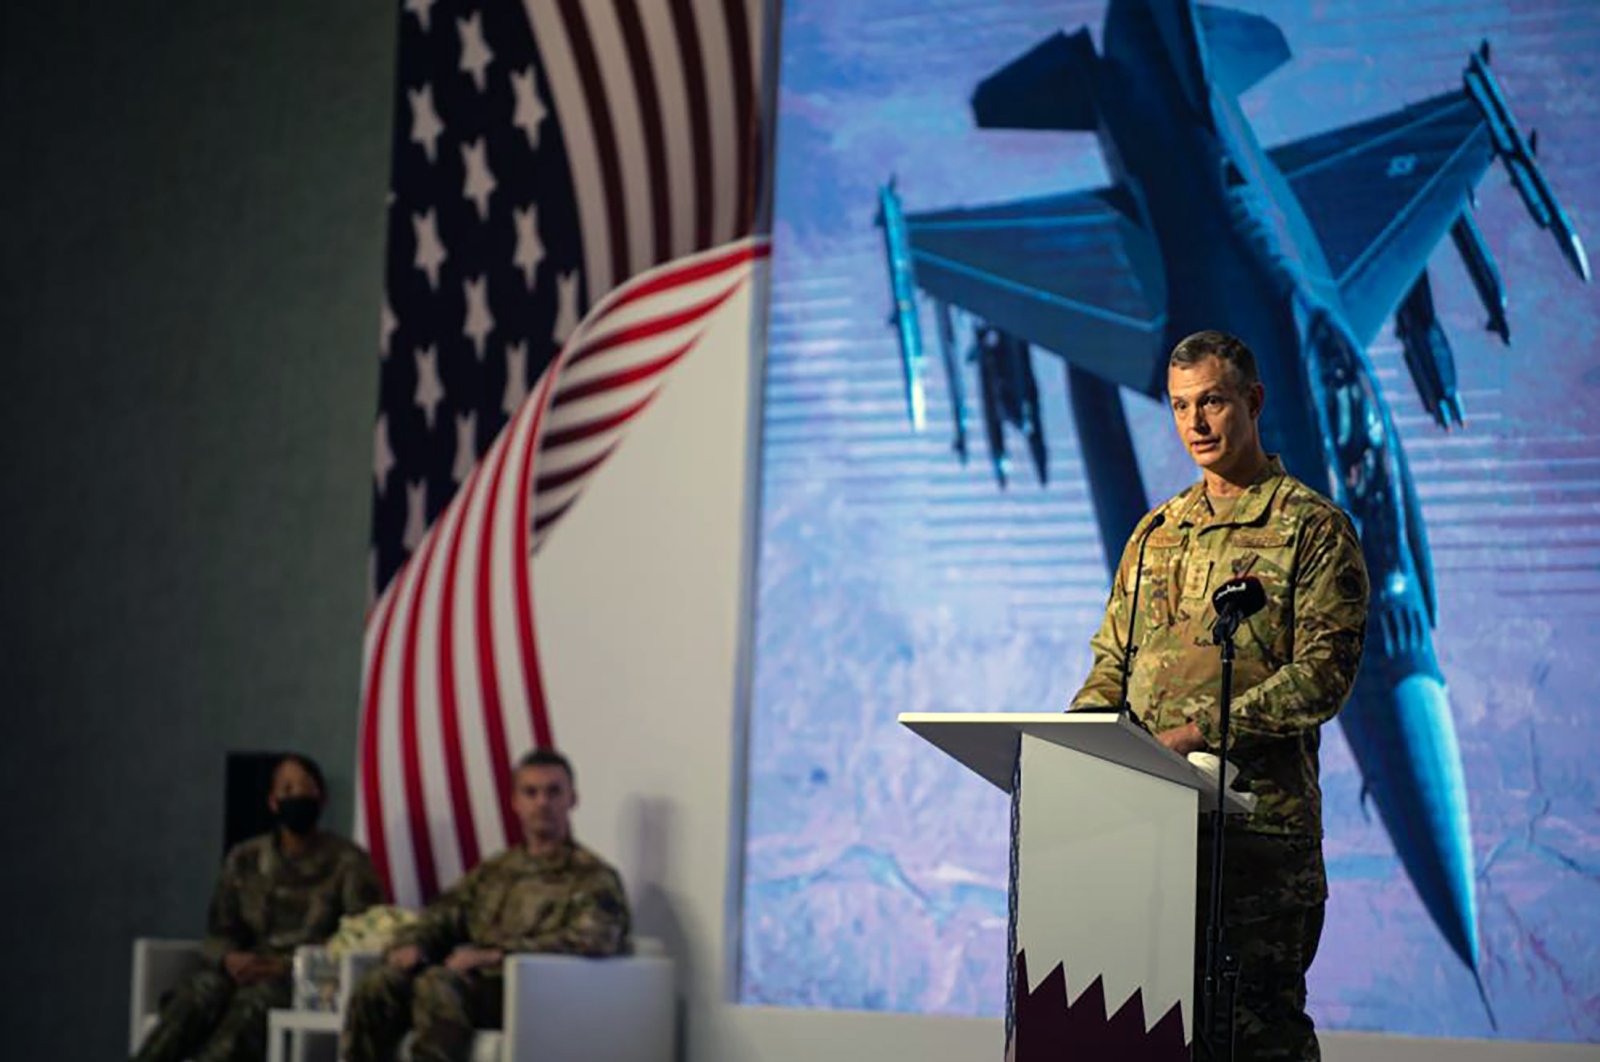 This image provided by the U.S. Air Force shows U.S. Air Force Lt. Gen. Alexus G. Grynkewich, incoming Ninth Air Force (Air Forces Central) commander, delivering a commemorative speech during a change of command ceremony at al-Udeid Air Base, Qatar, July 21, 2022. (AP Photo)